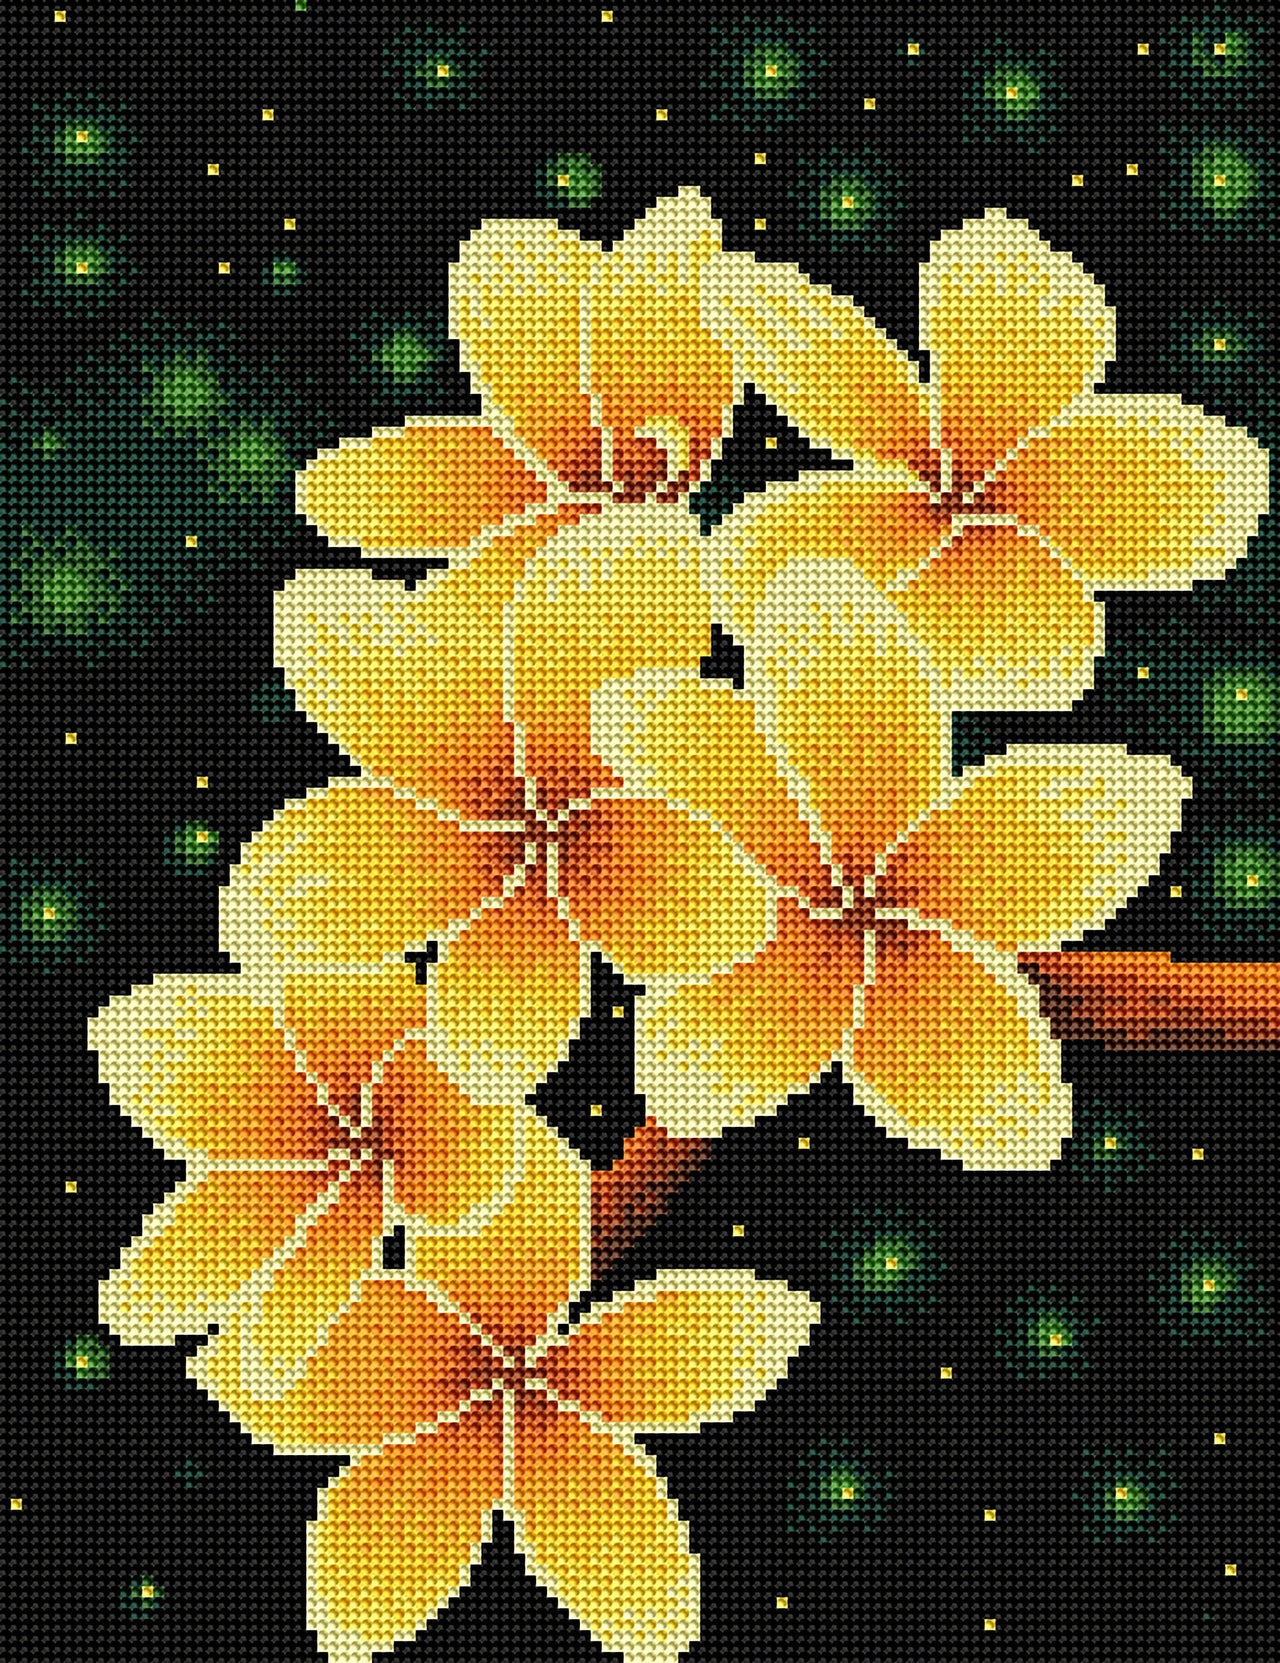 Diamond Painting Plumeria 13" x 17" (32.8cm x 42.6cm) / Round With 14 Colors Including 2 ABs and 1 Iridescent Diamonds / 17,784